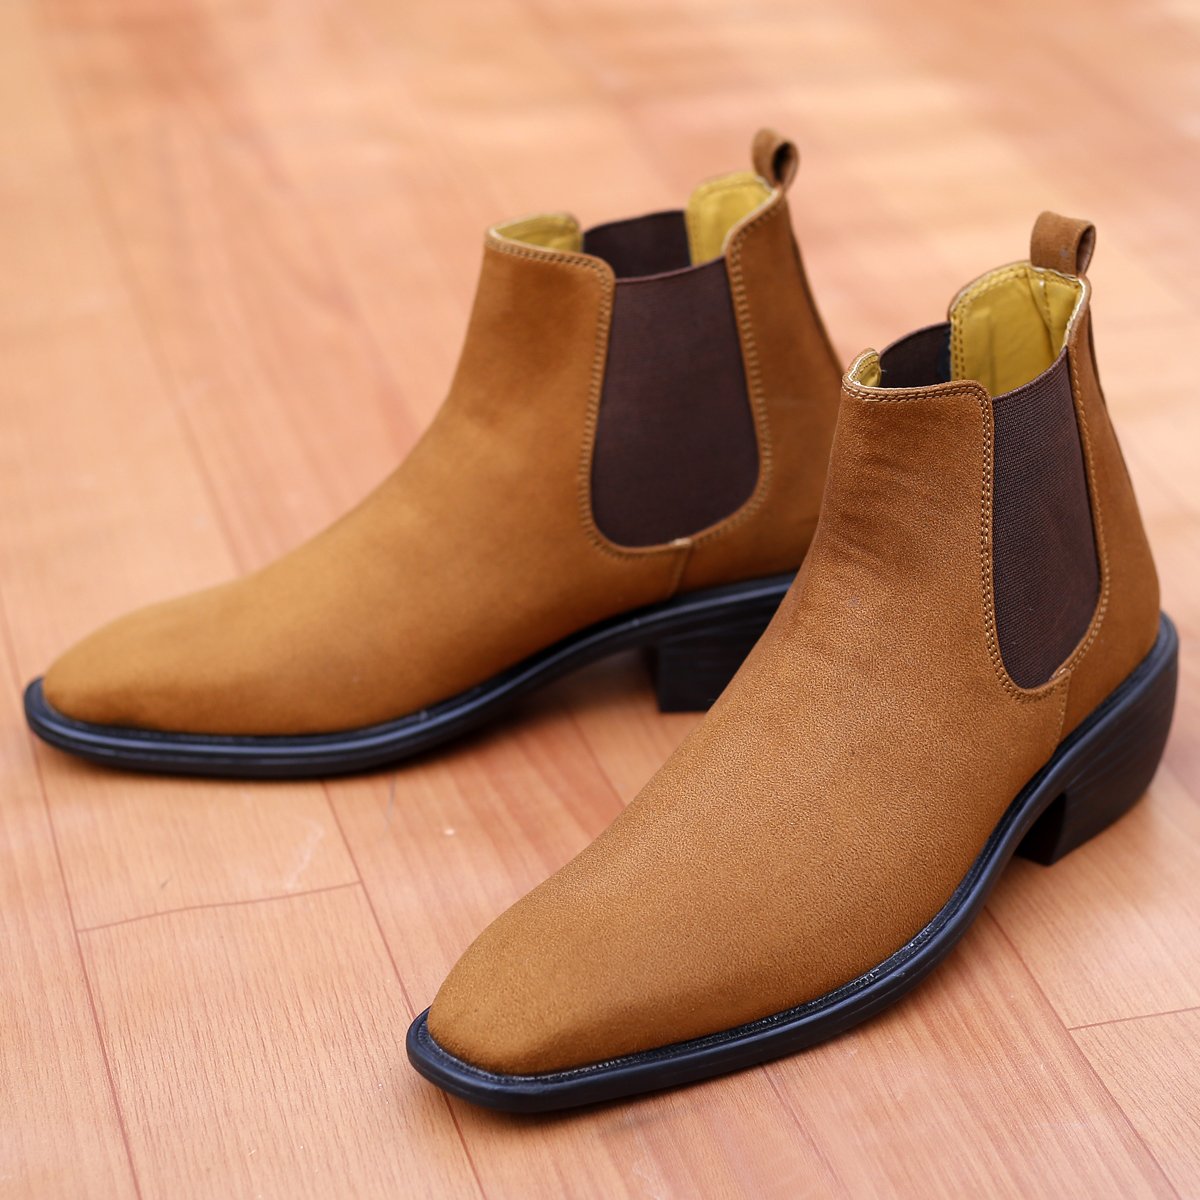 Jack Marc Height Increasing Stylish Suede British Boots - JACKMARC.COM